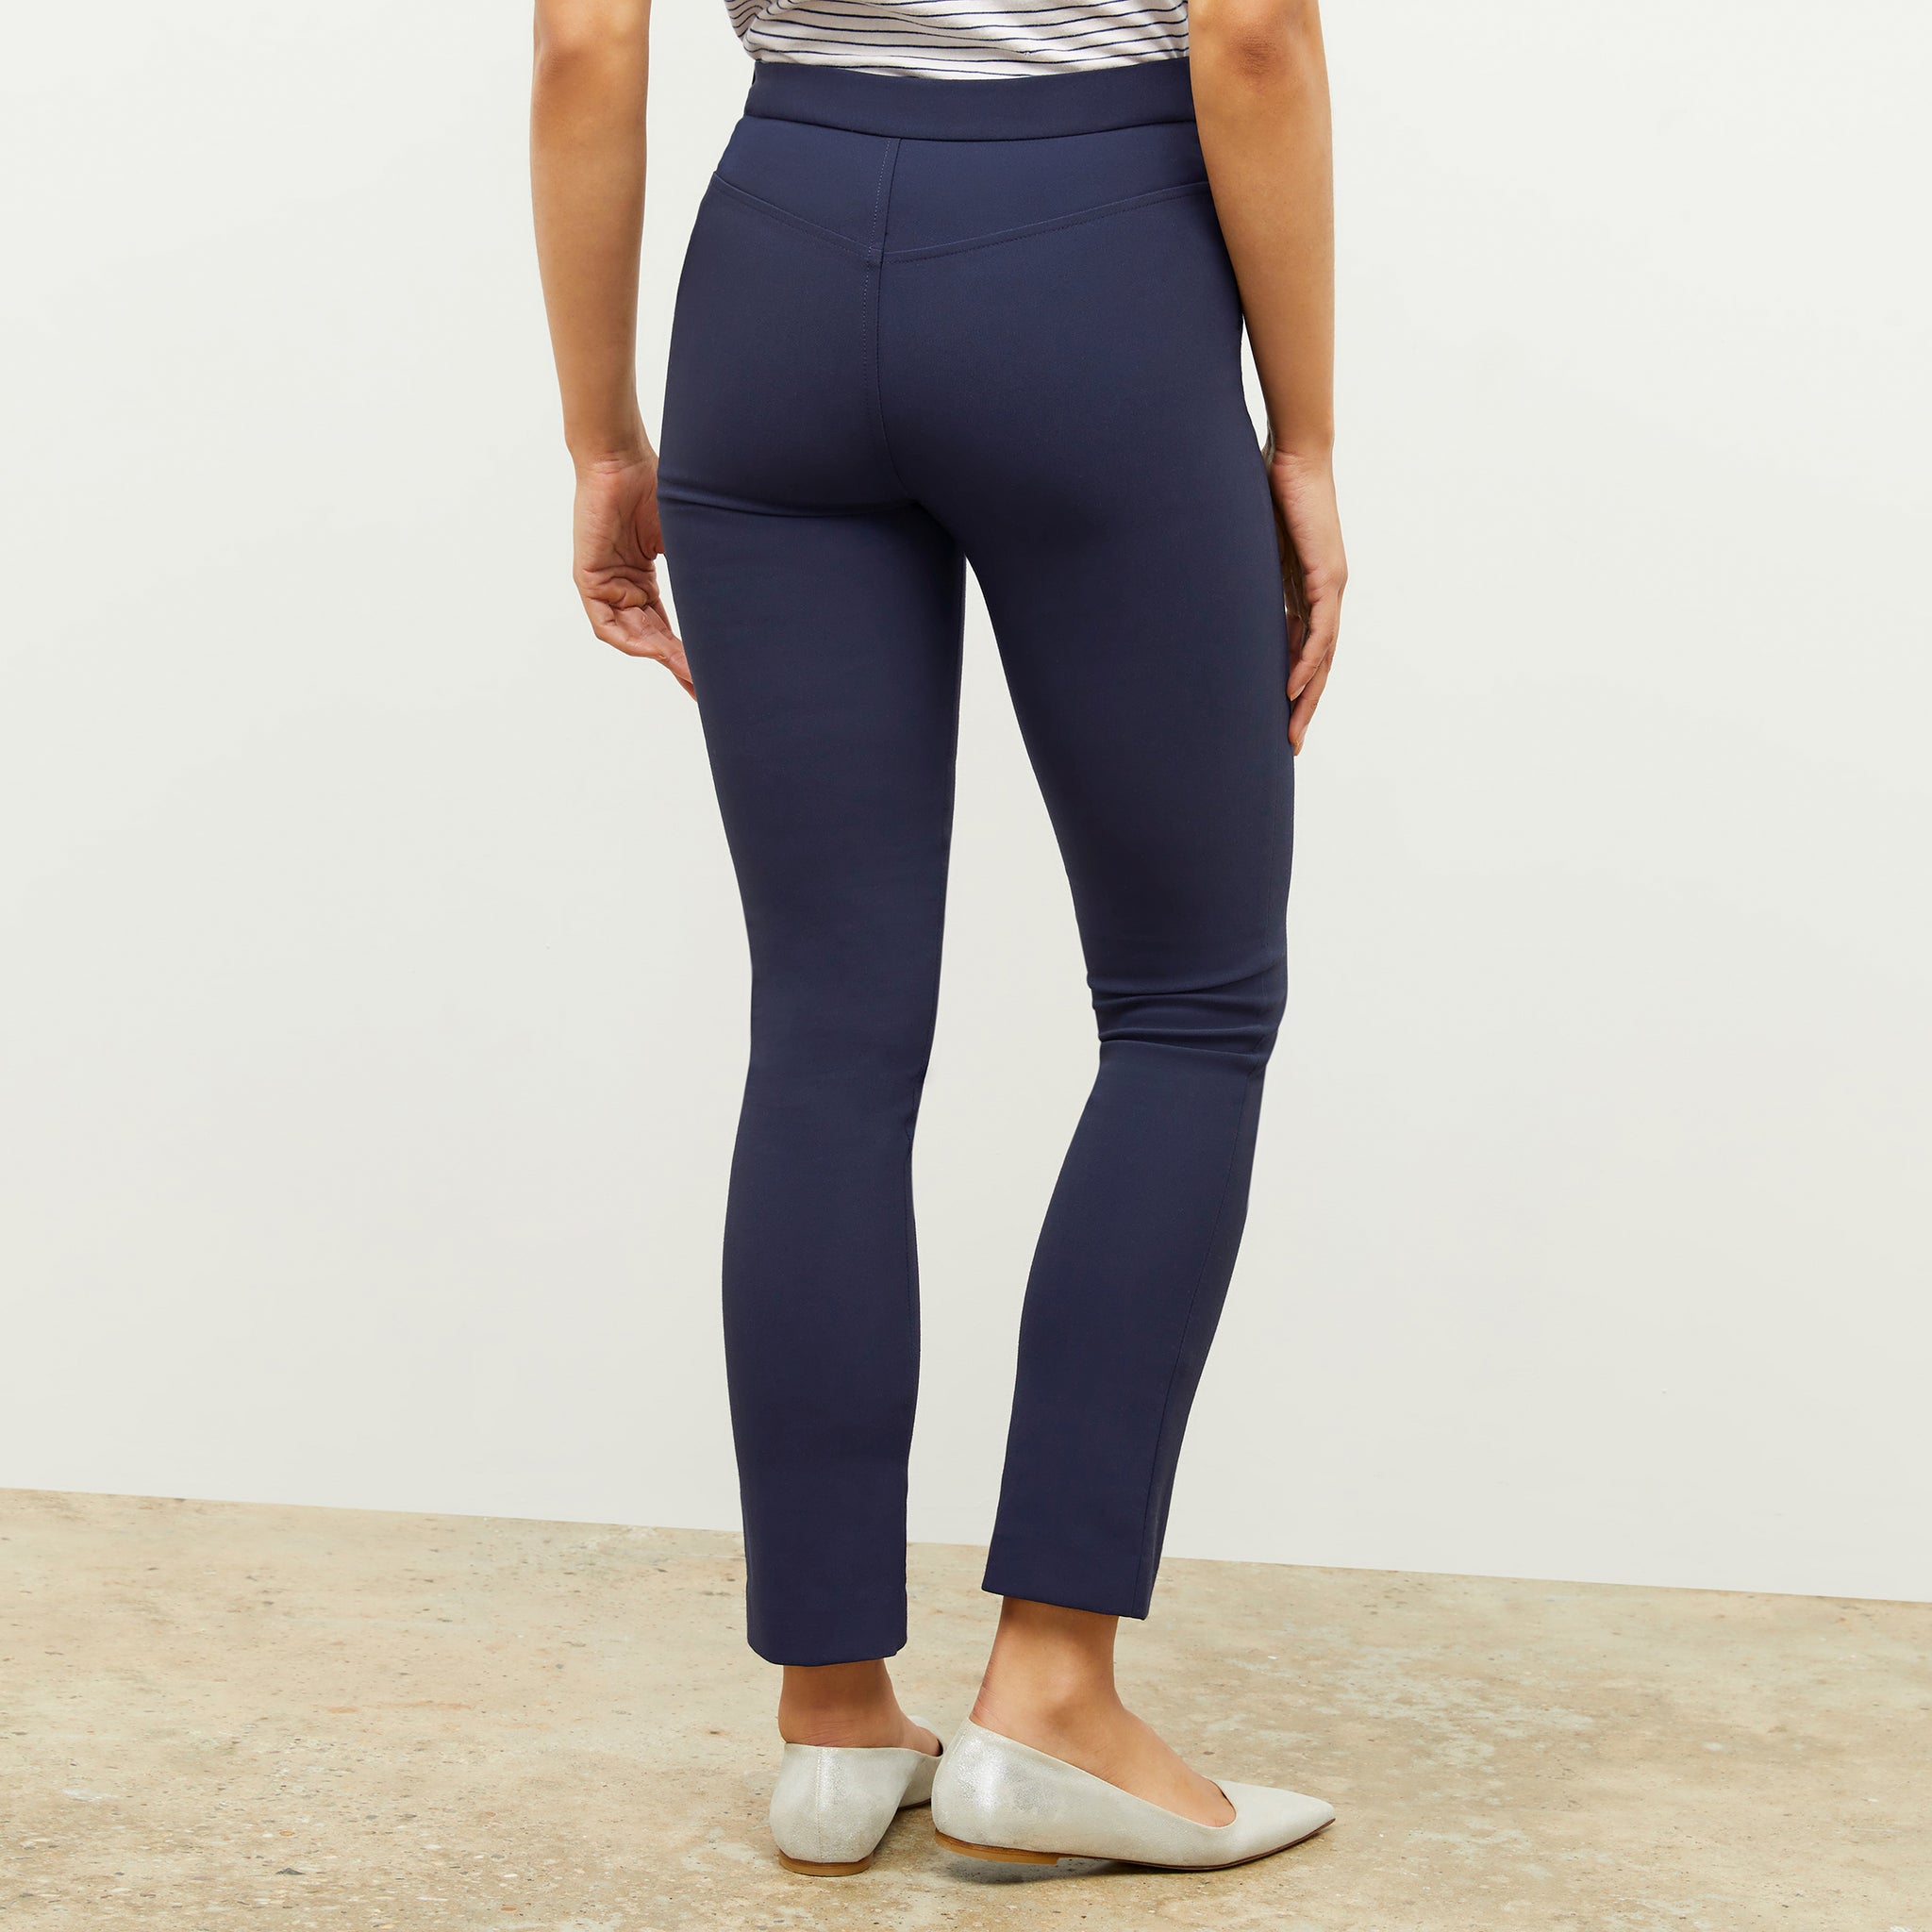 Front image of a woman standing wearing the foster pant in dark navy